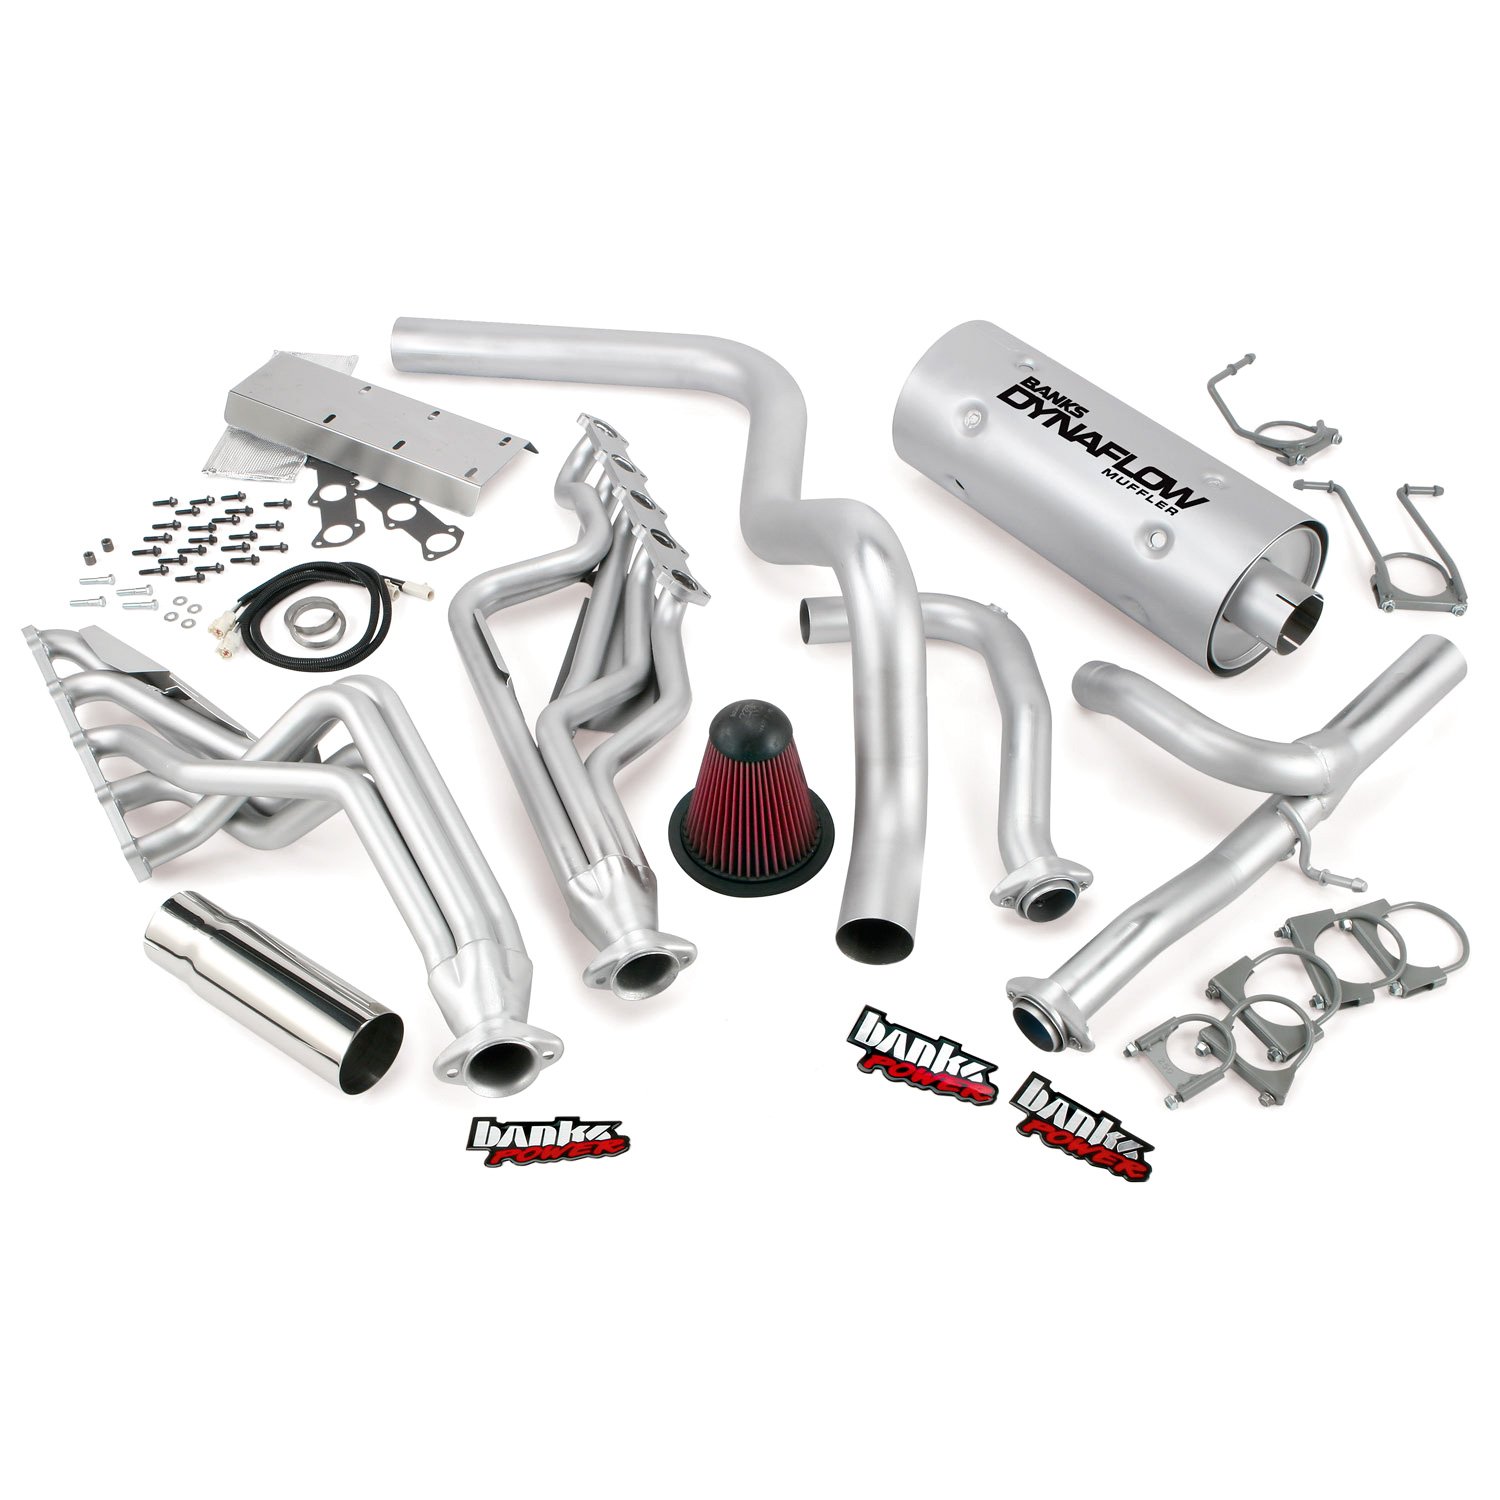 Exhaust PowerPack System 2013 Ford Class C Motorhome